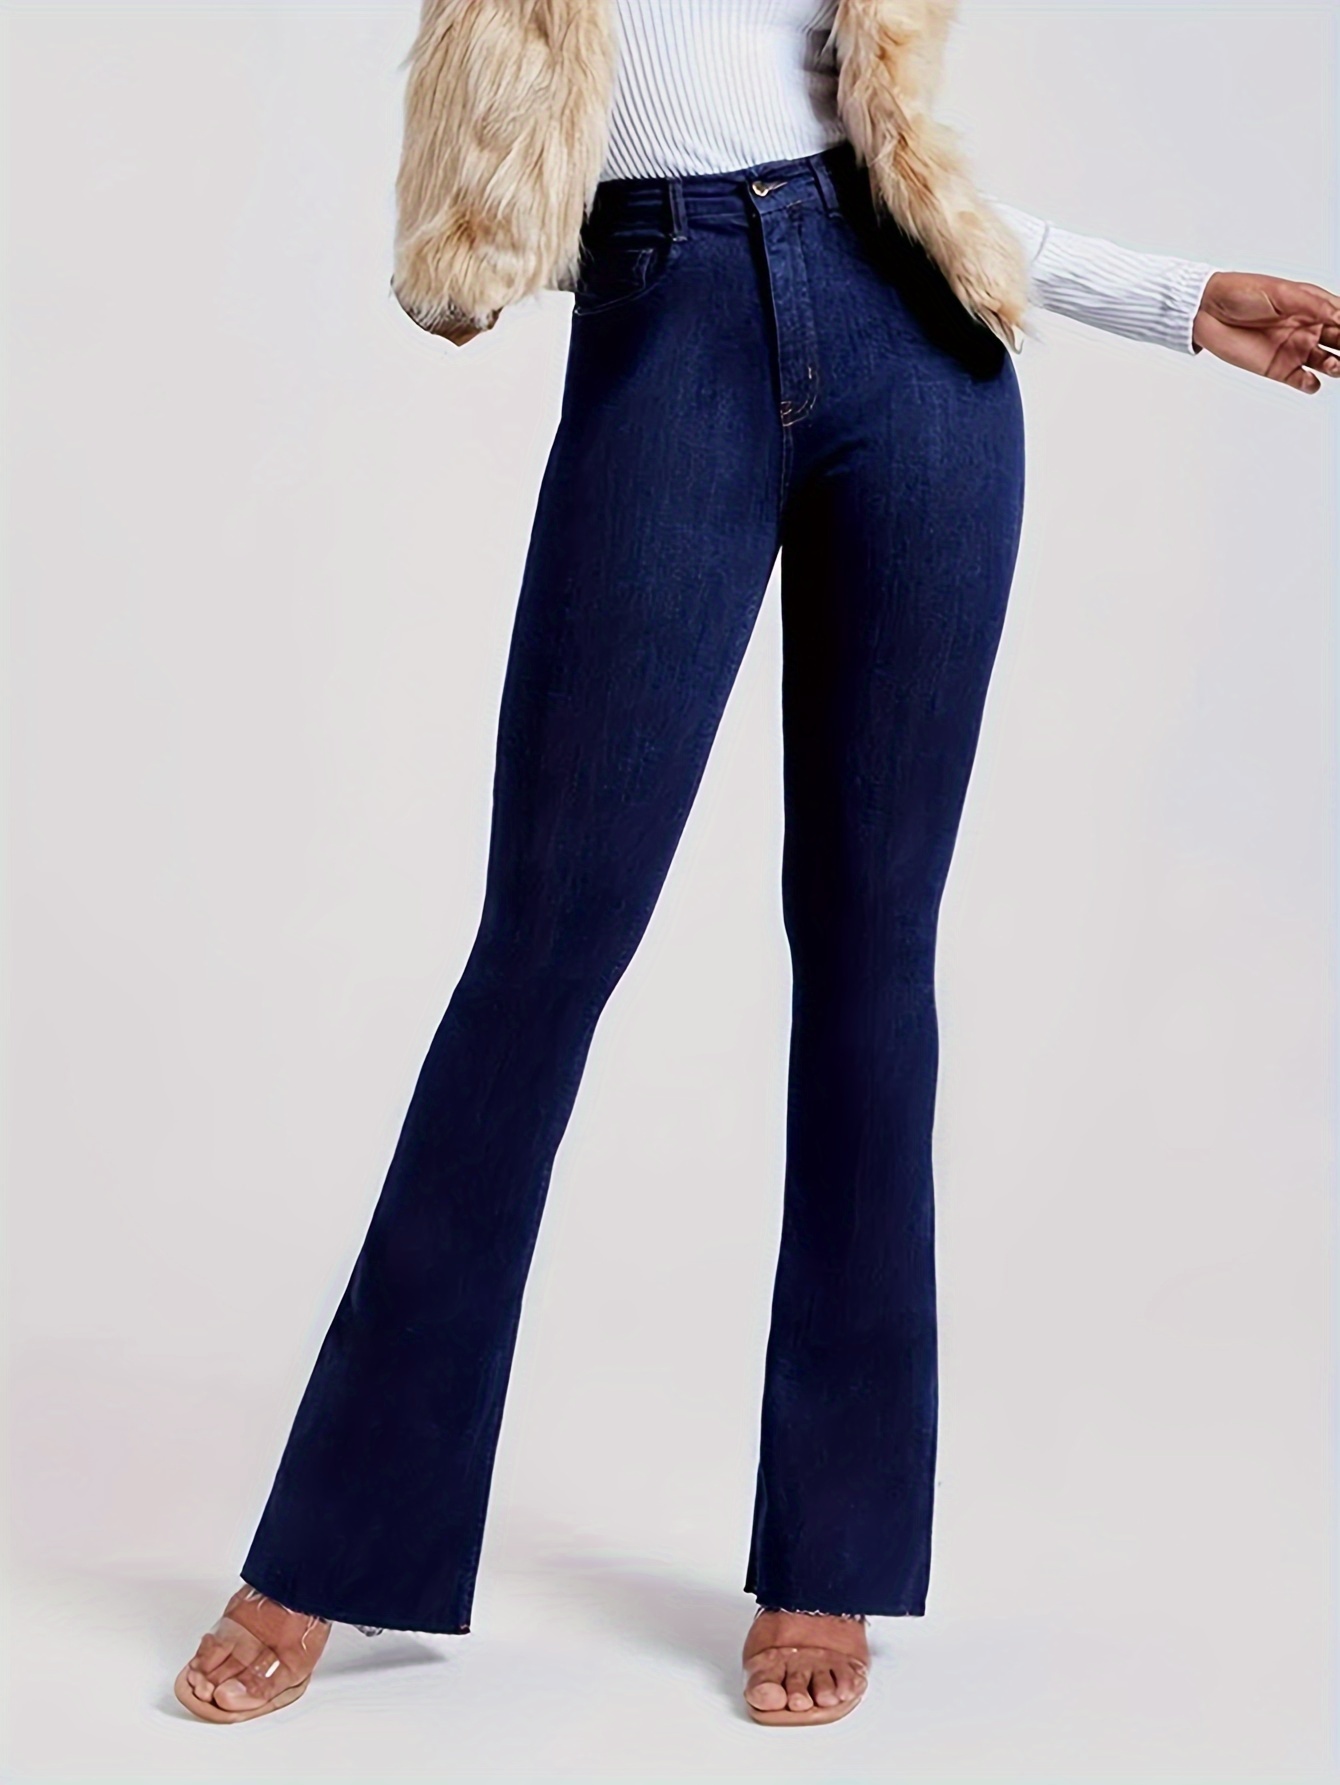 Colored Jeans for Women